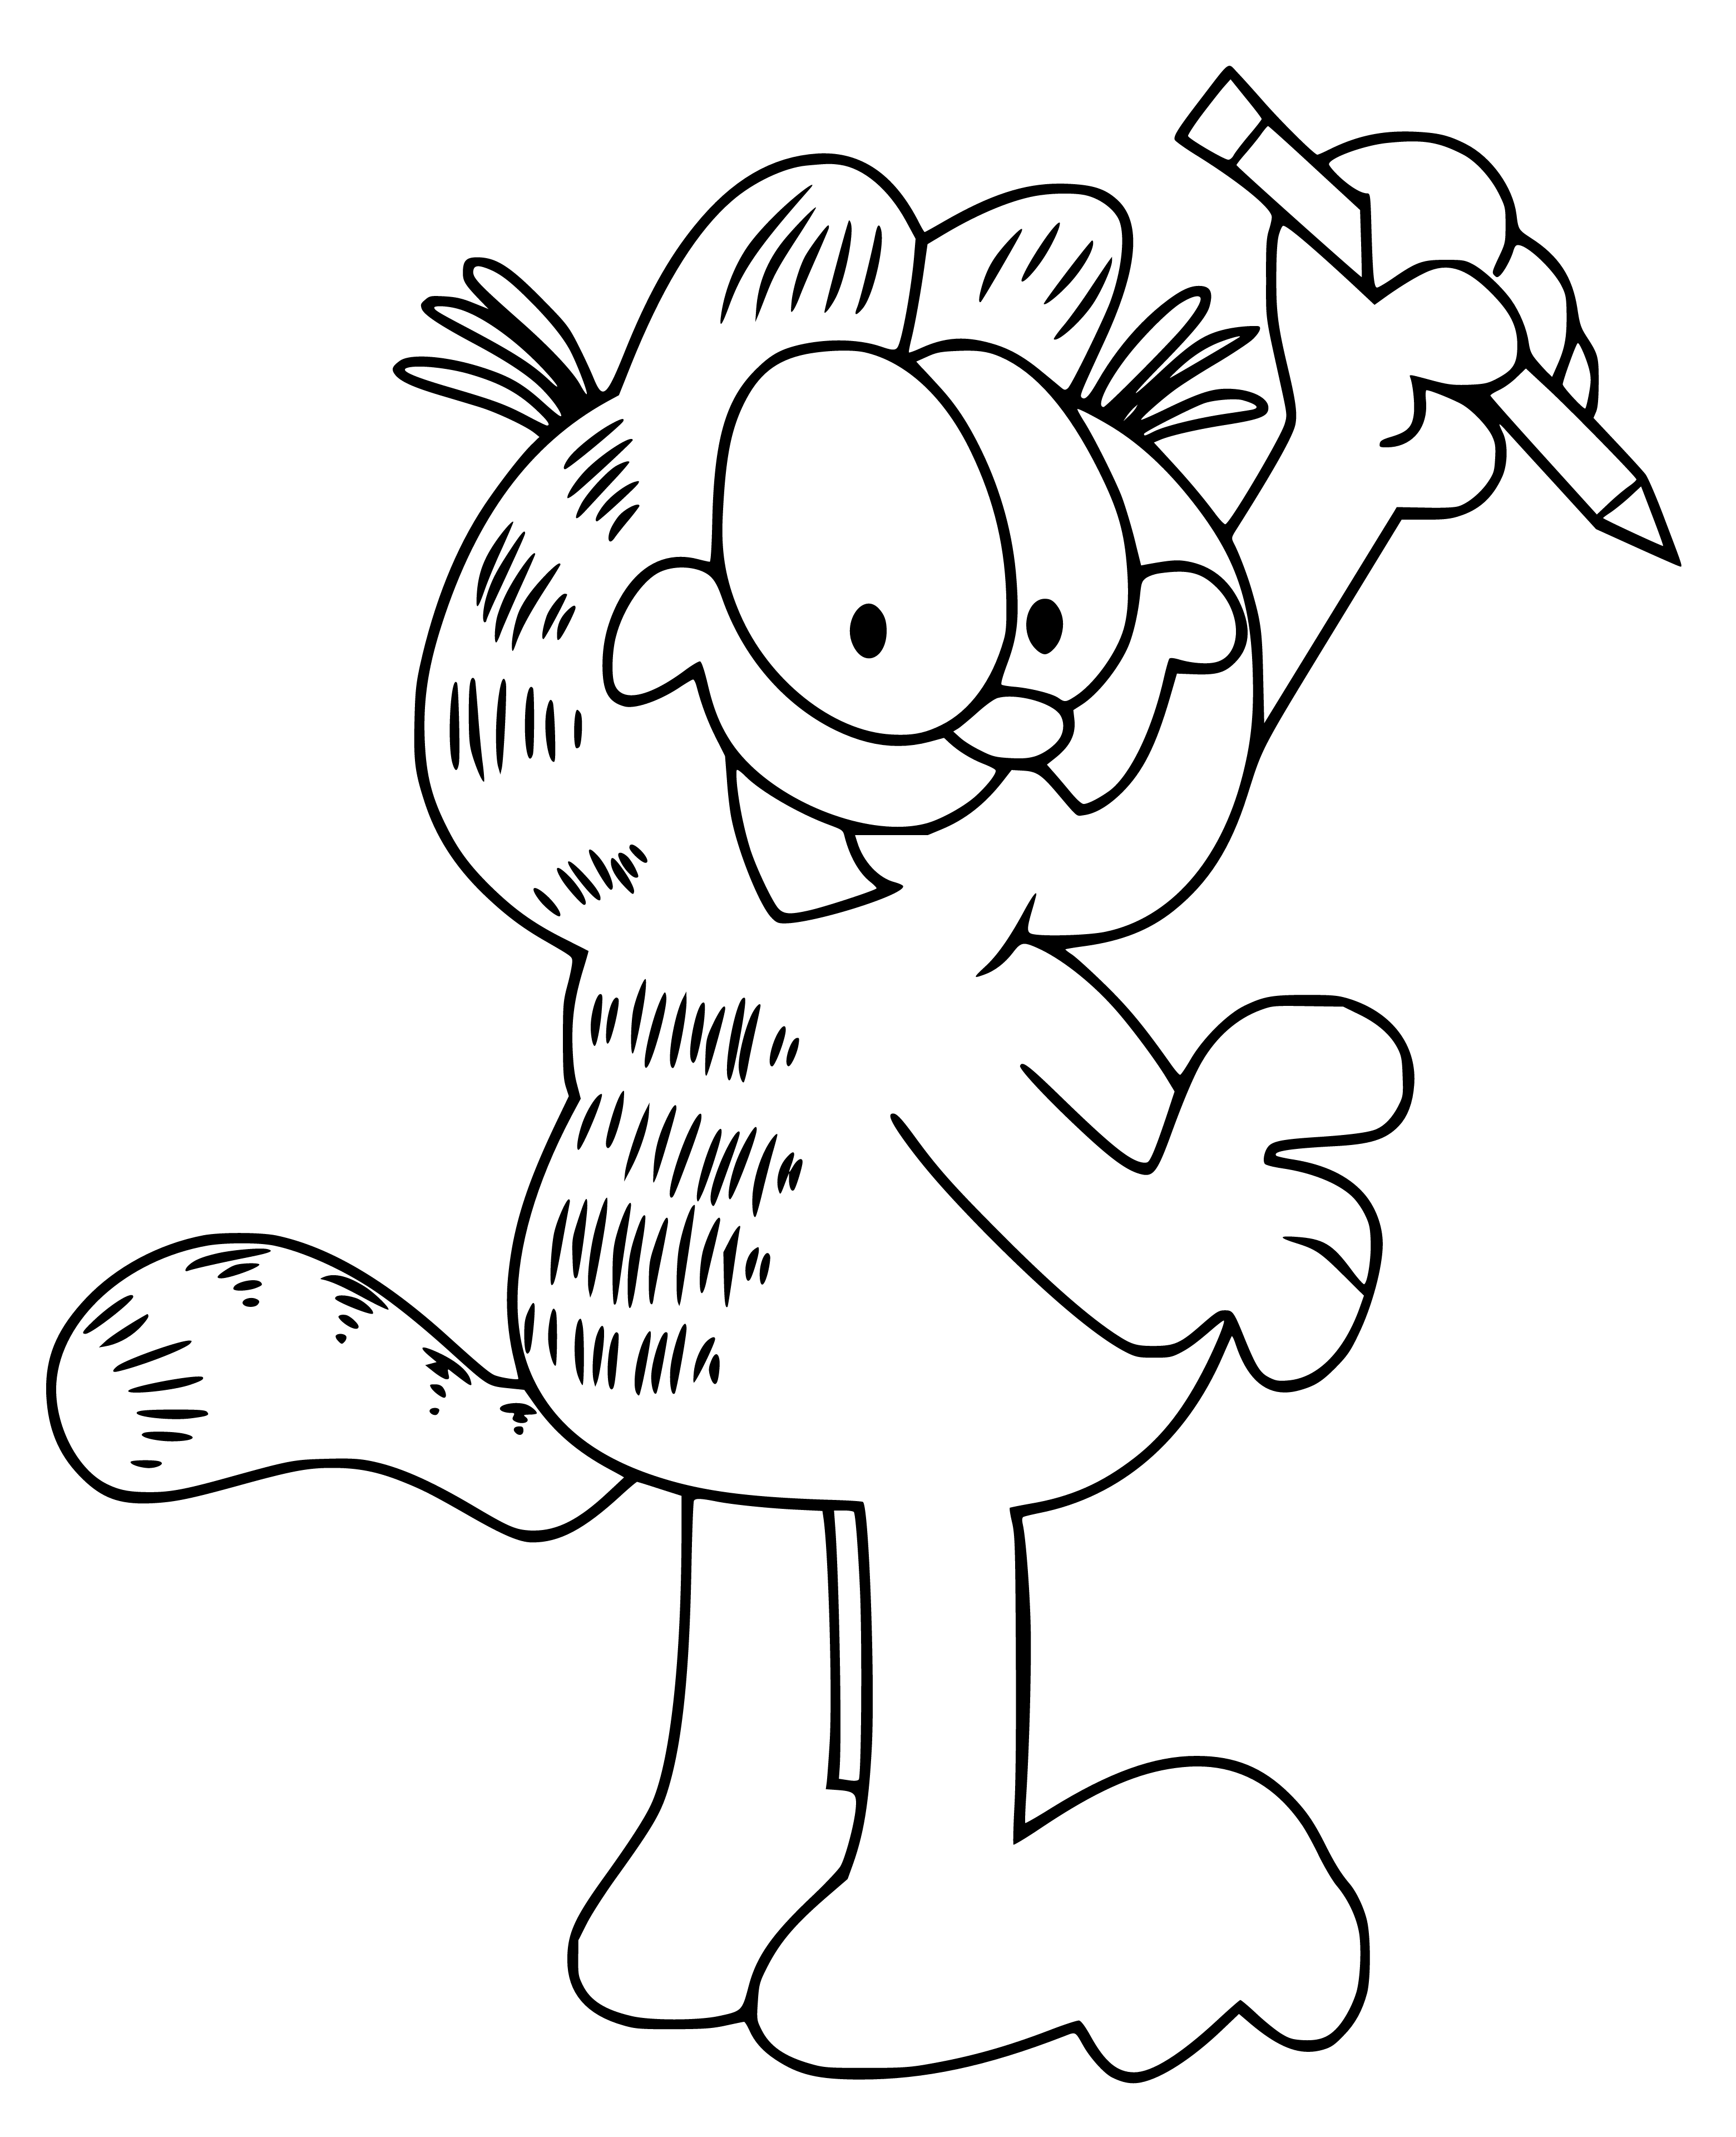 Garfield as Student Coloring Page for Kids - SheetalColor.com